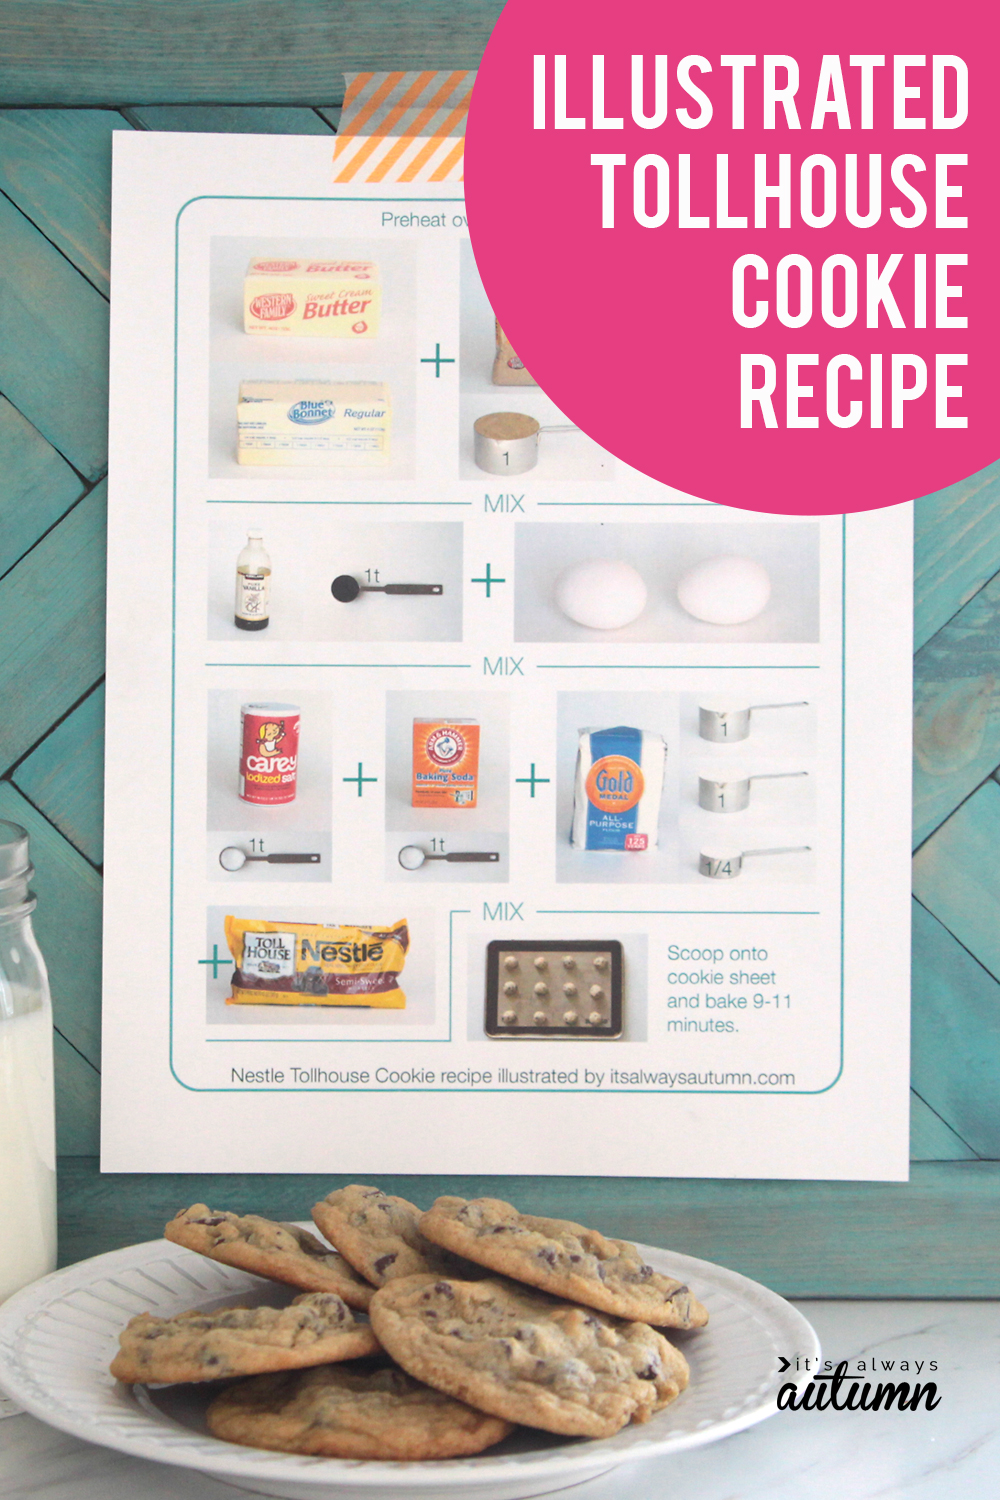 This illustrated cookie recipe makes it easy for kids to help make cookies!